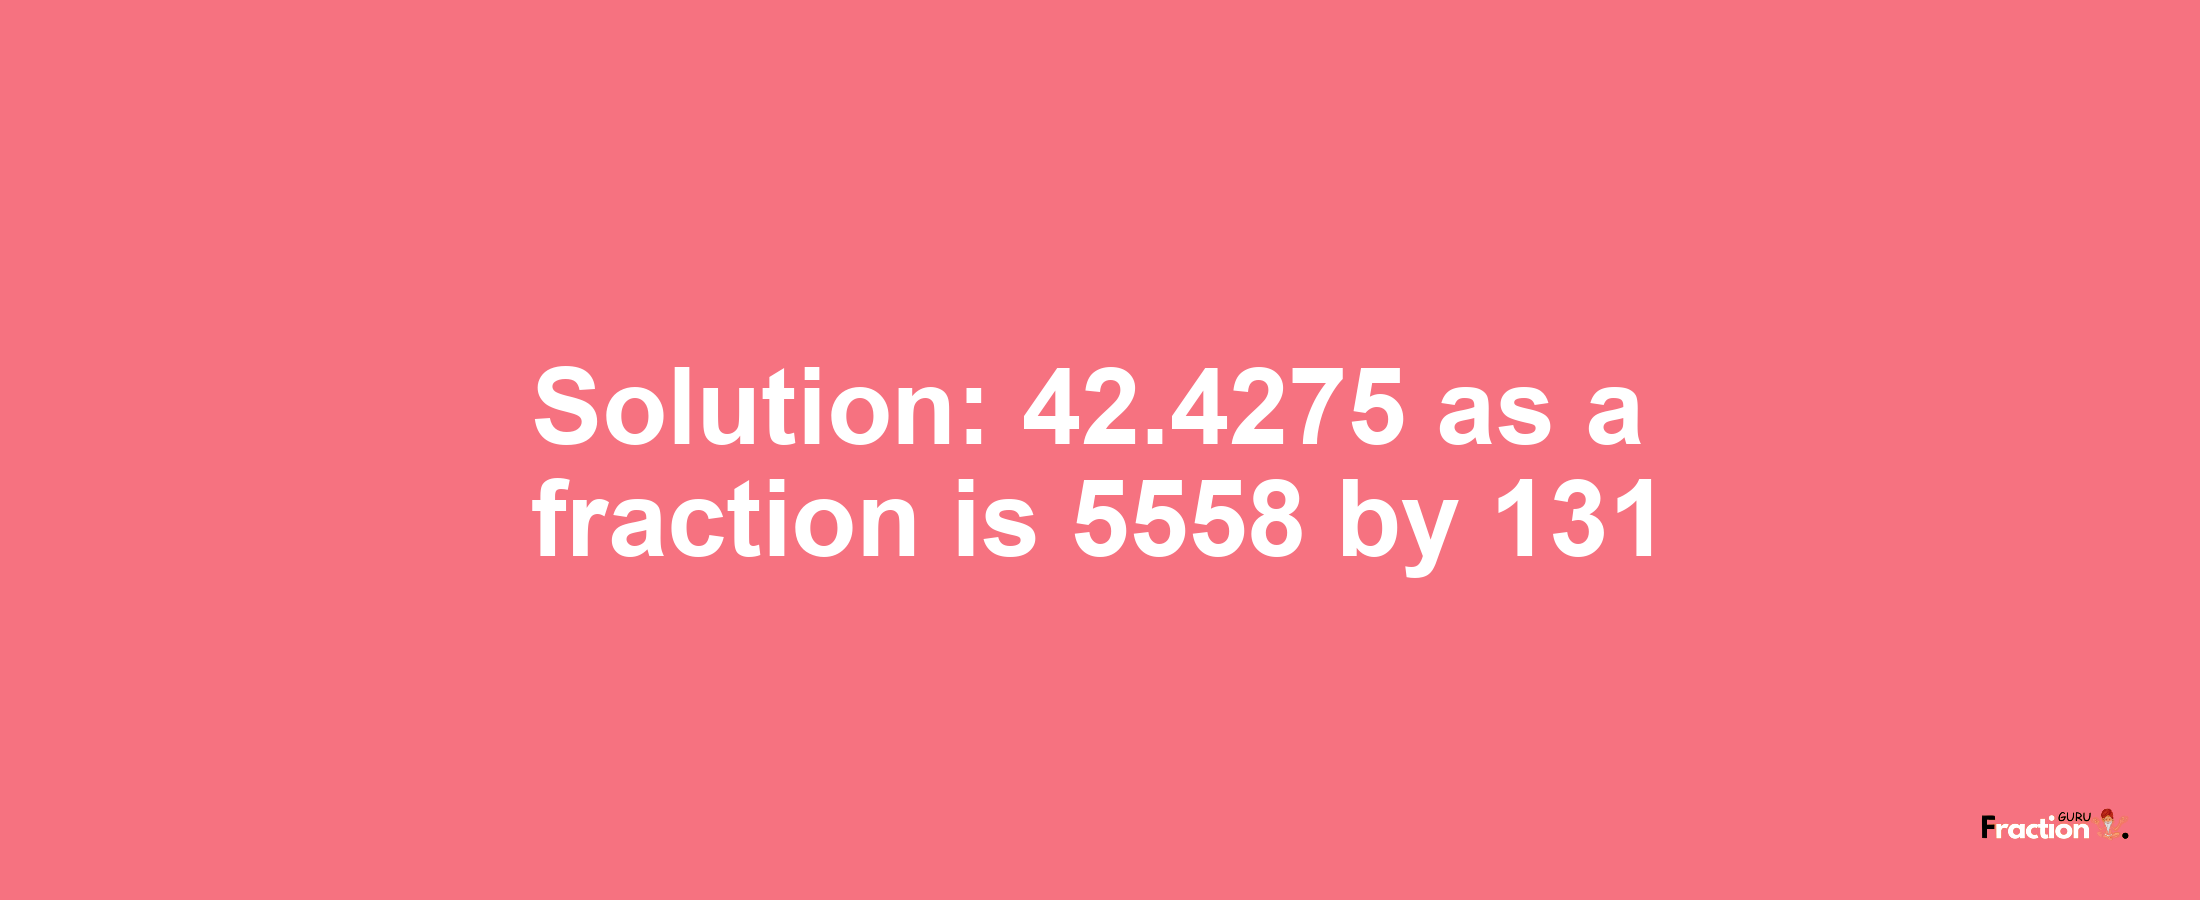 Solution:42.4275 as a fraction is 5558/131